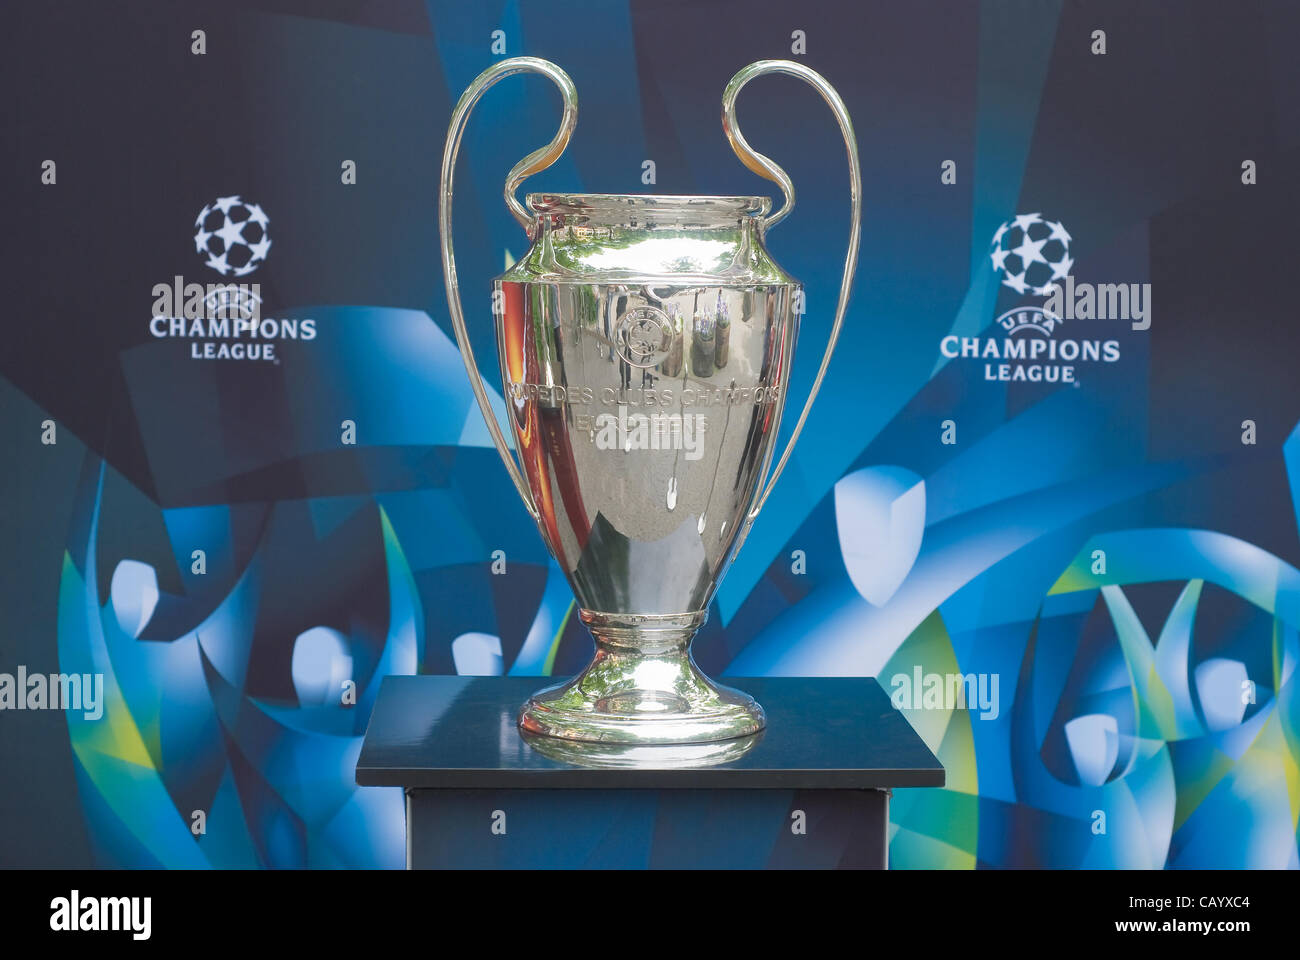 Munich, Germany – May 11 : UEFA Champions League Trophy on display for the May 19 Champions League Final May 11, 2012 in Munich. Stock Photo